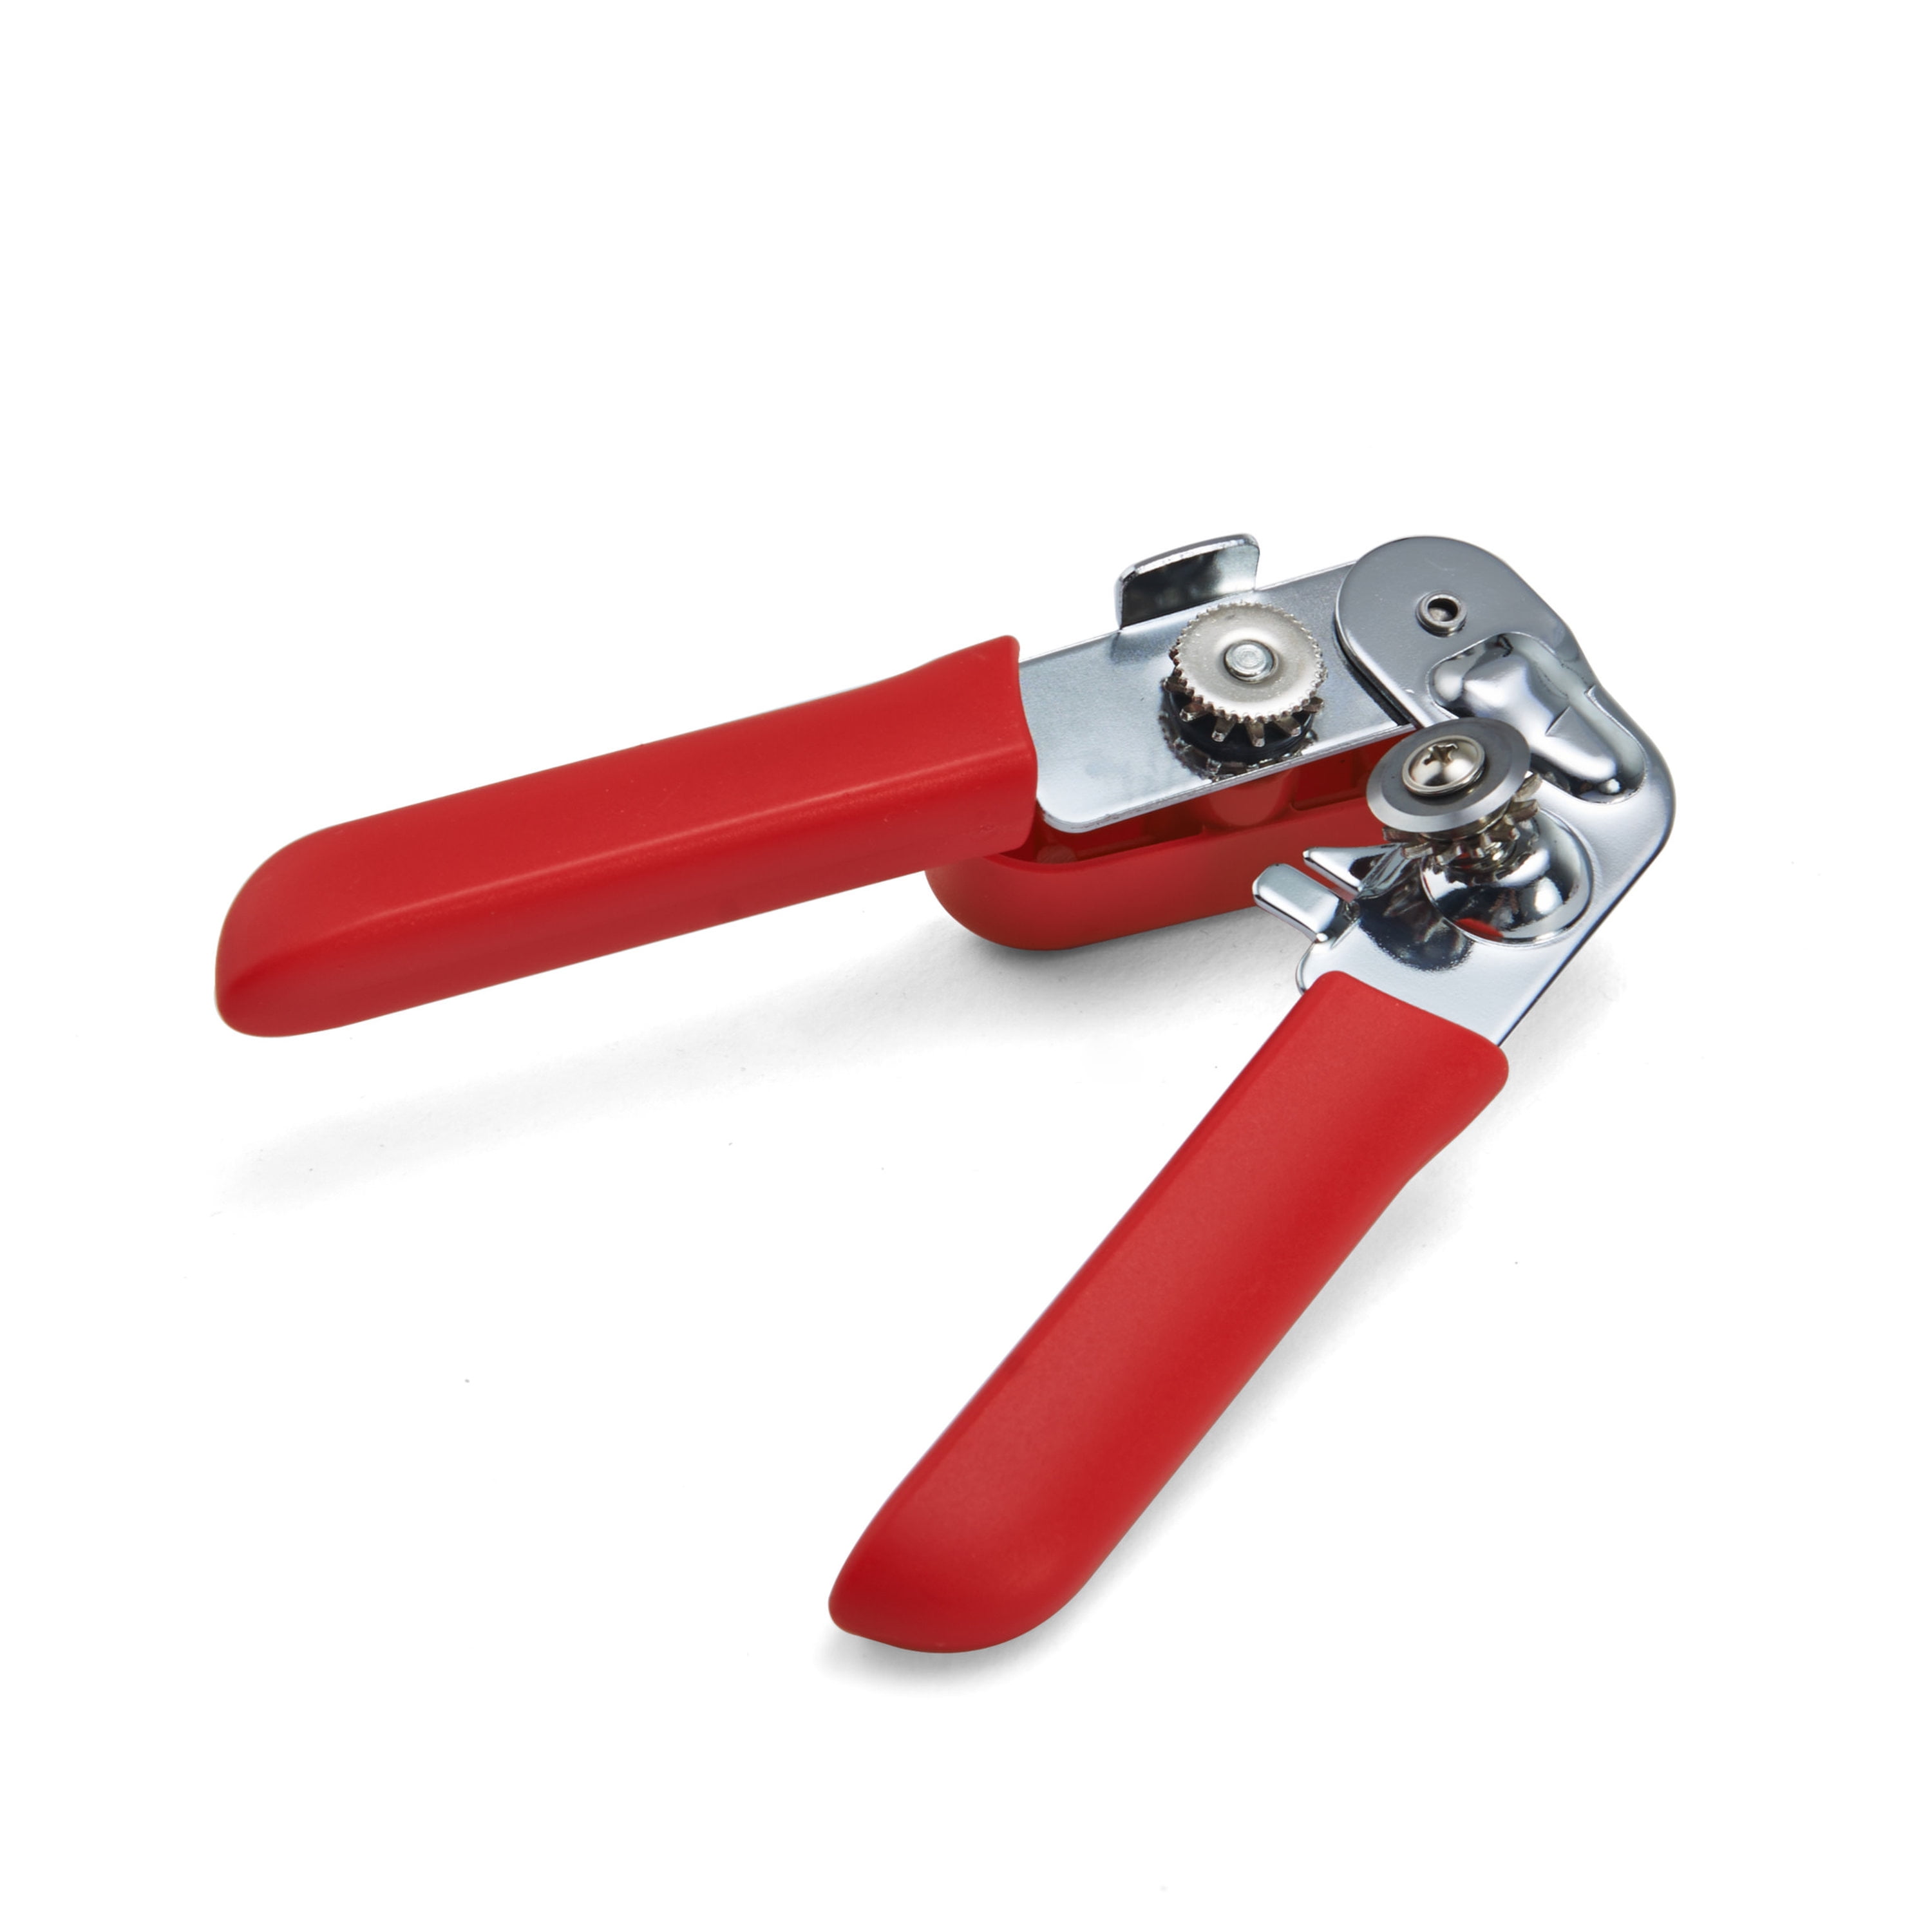 Farberware Professional Can Opener with Built-in Bottle Opener in Red 